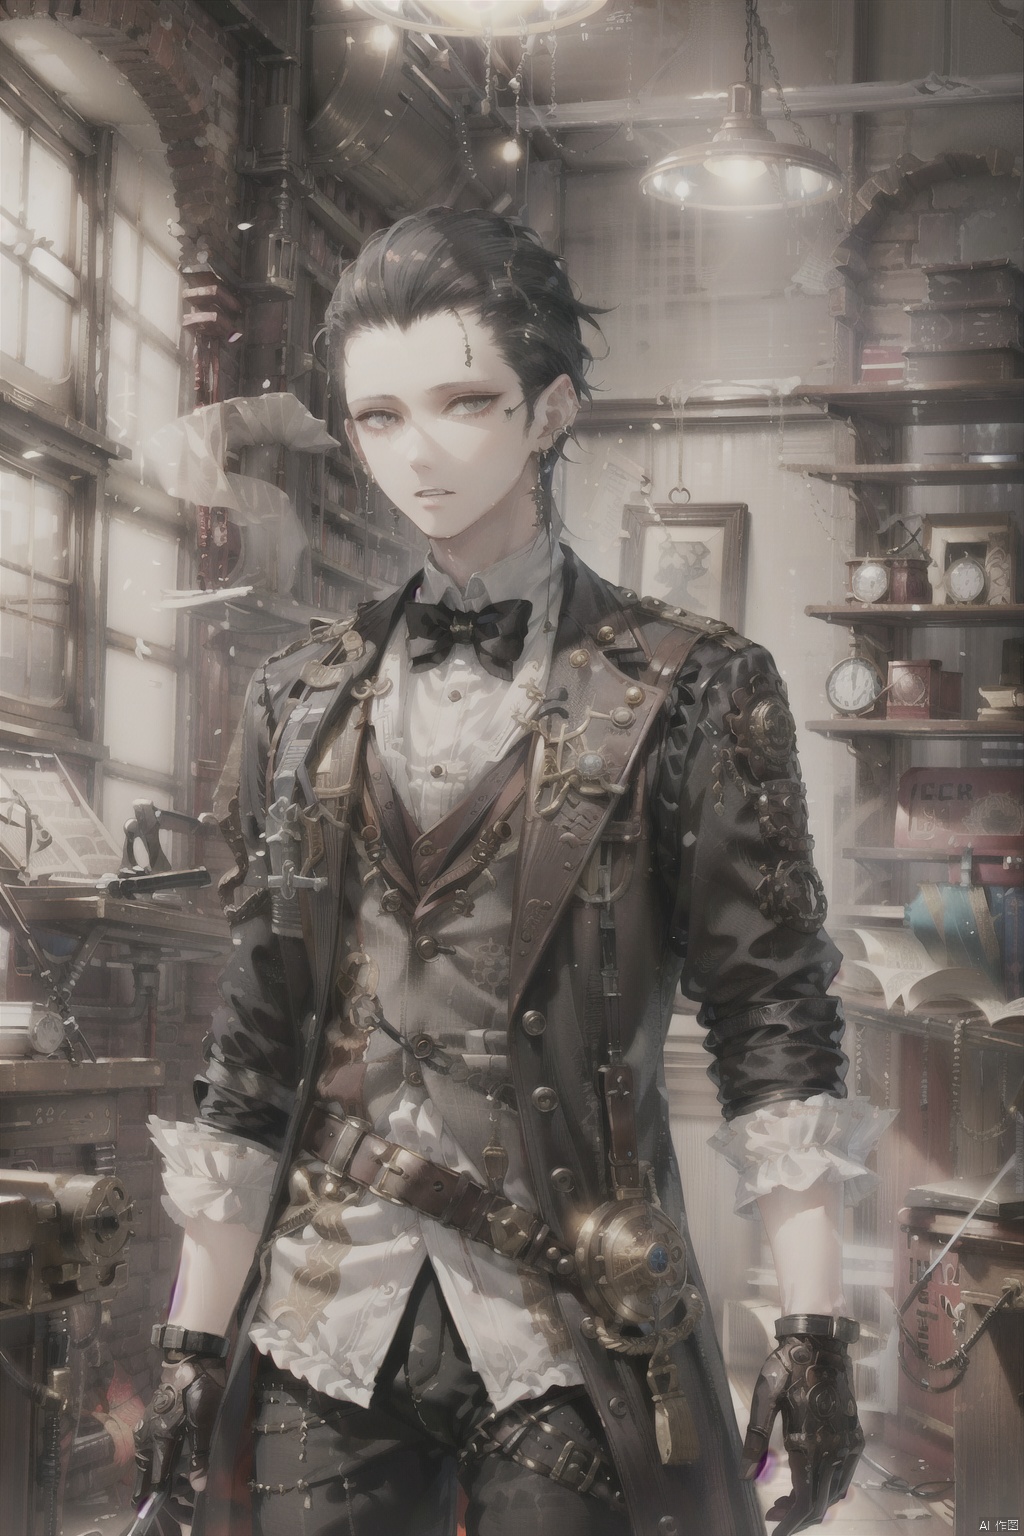  masterpiece,best quality,UHD,impossible clothes,****_male,detective,medieval, nai3, (\fan hua\), 1boy earrings,steampunk,black hair,white cardigan,white jabot,english text,fume,hair slicked back,evil,peril,grey vest,grey eyes,glowing eyes,ray tracing,fog,exhaust,beam,black windbreaker,magnifying glass,suit jacket,blazer,cane,library,leather boots,leather gloves,black belt,watch,steampunk, 1boy earrings, supersteampunk,violin,piano,medieval,steampunk